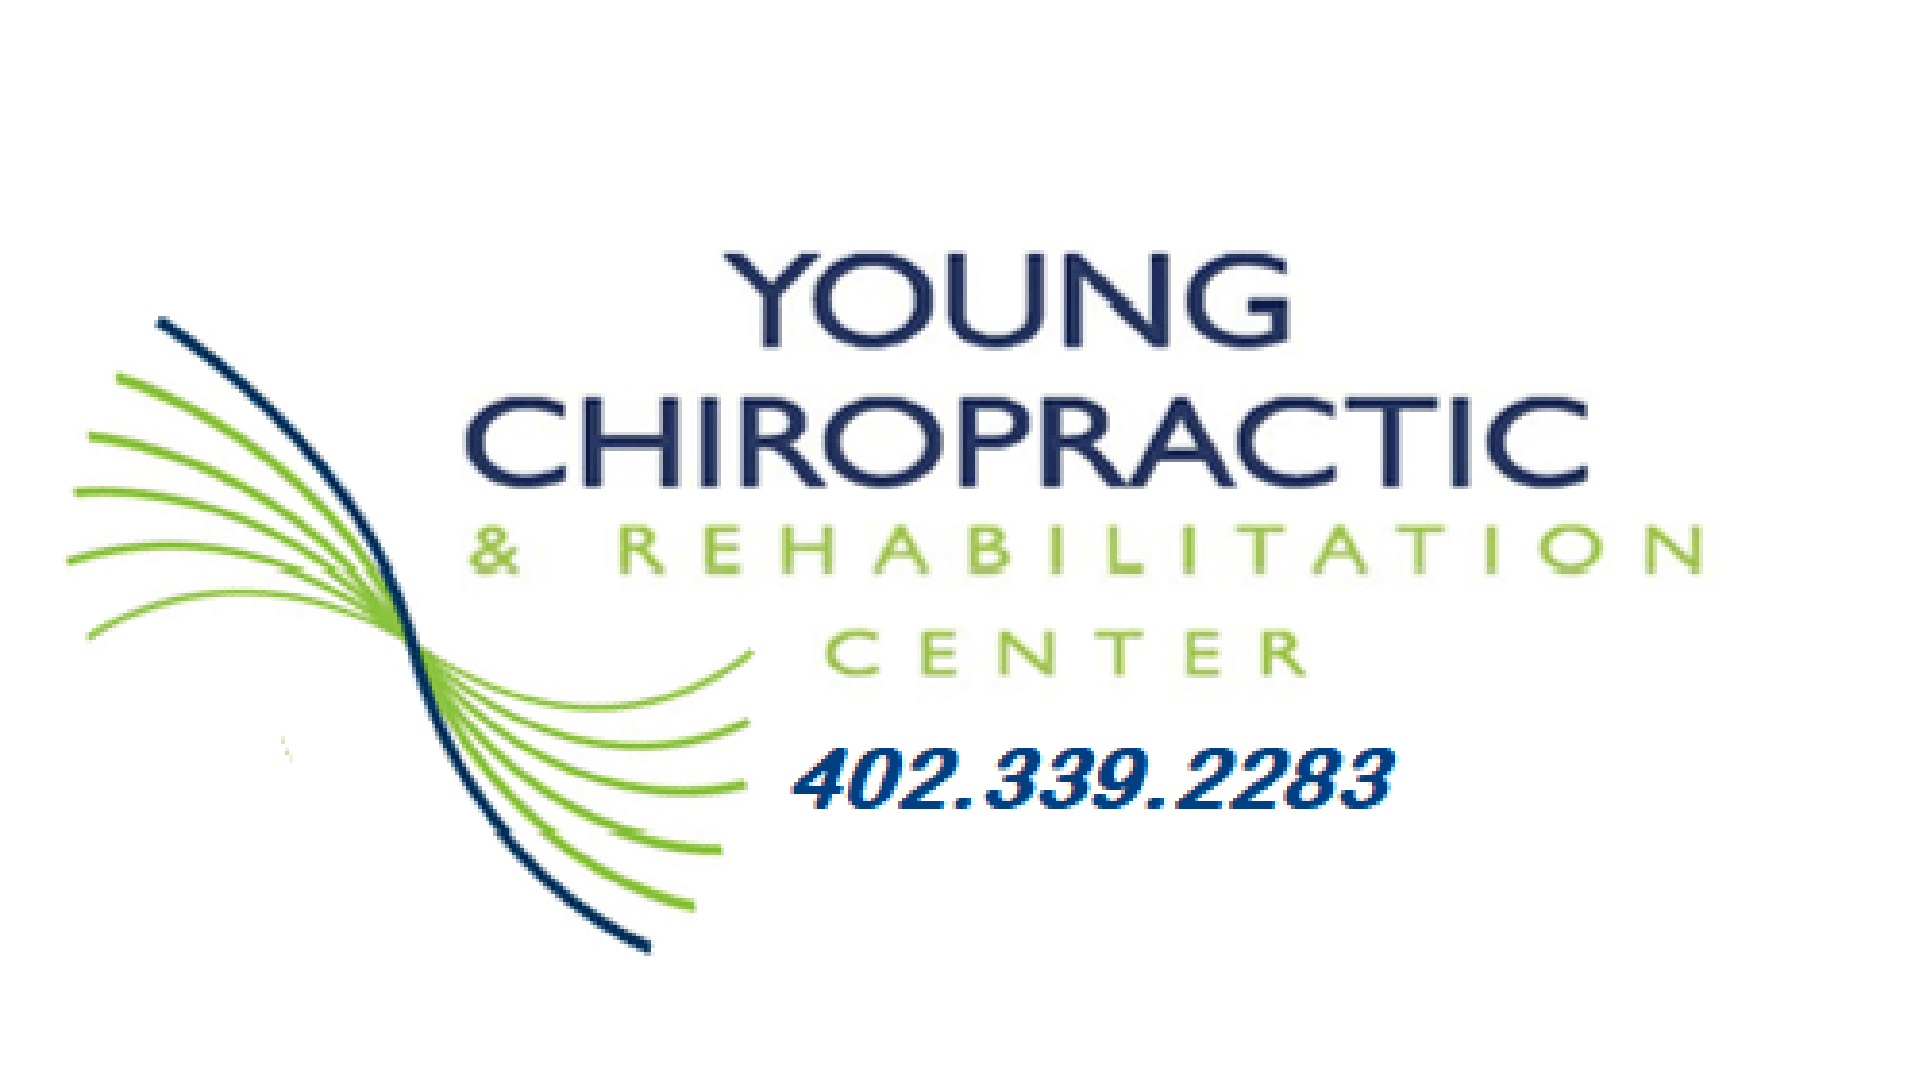 Young Chiropractic